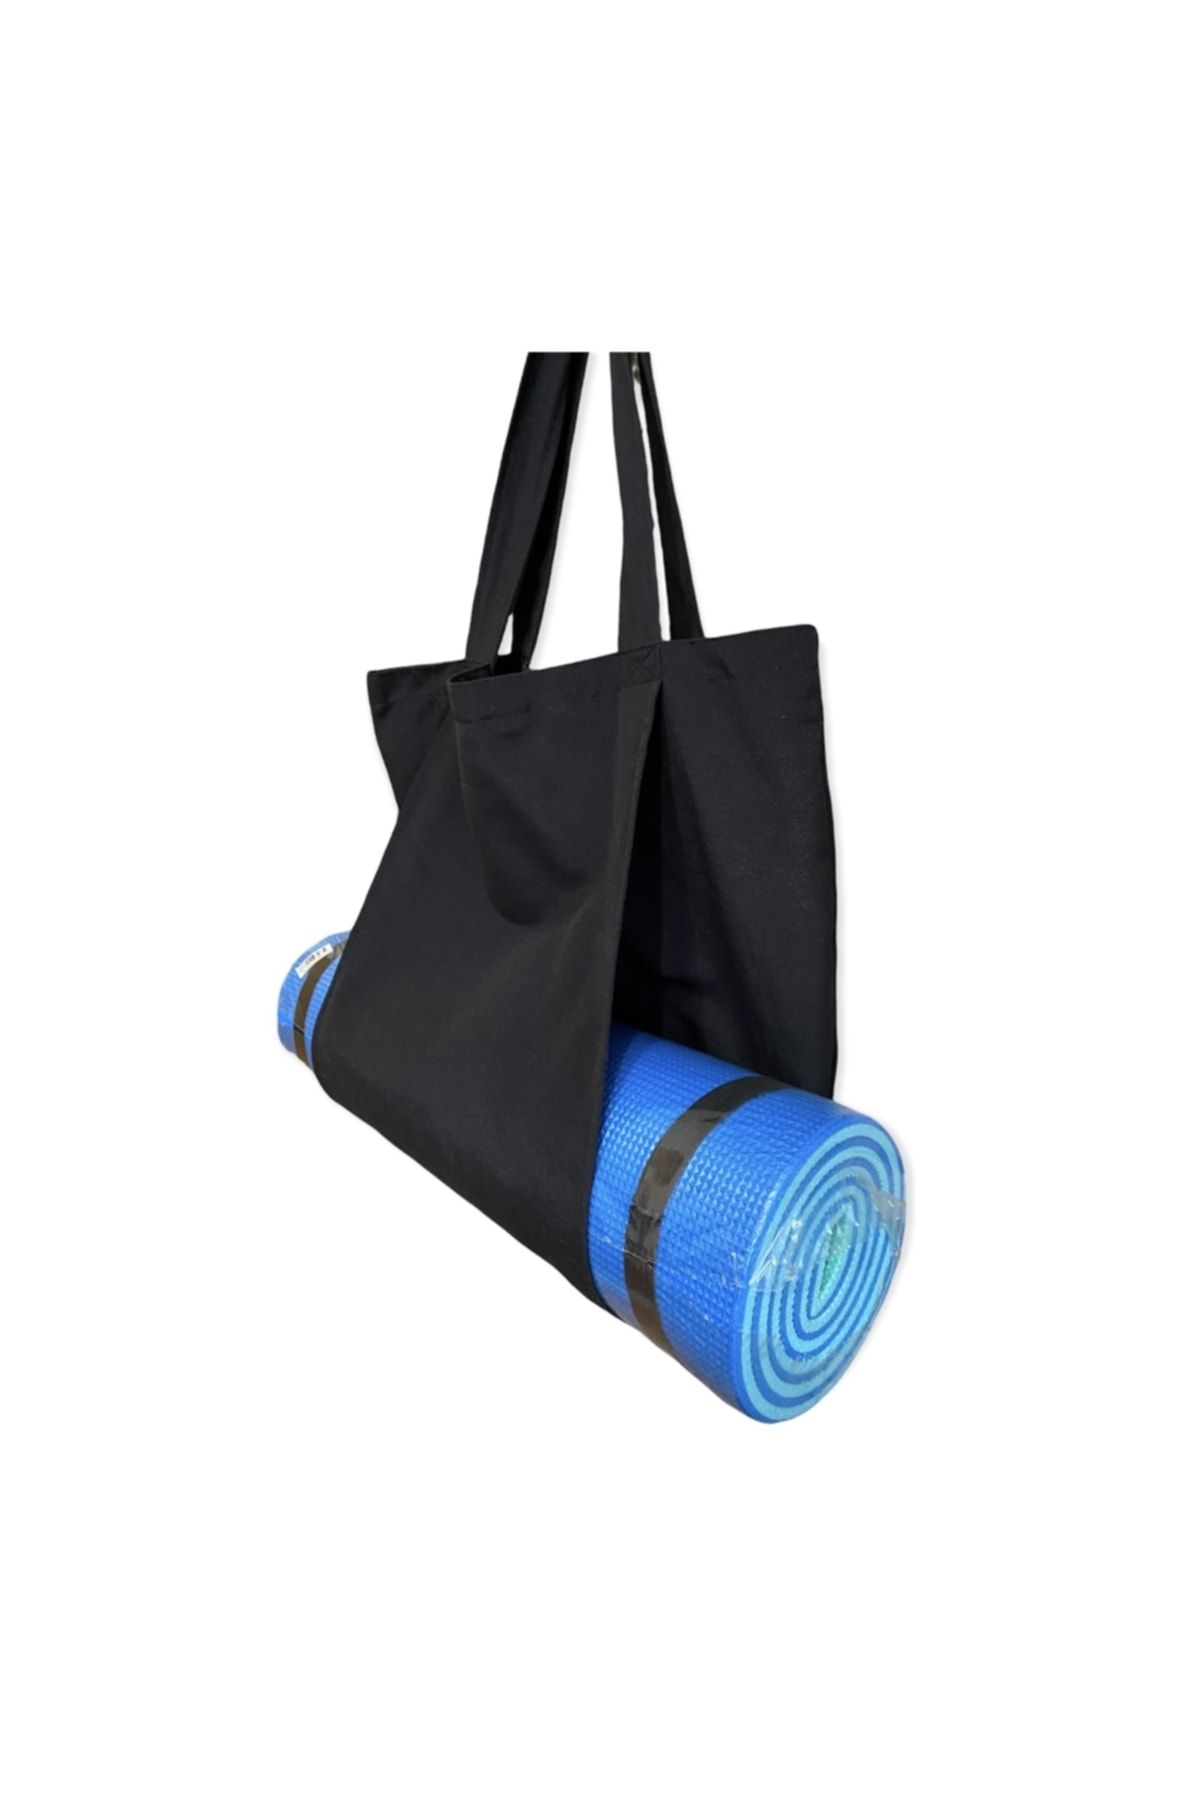 REMEGE Mat Carrying Bag - Yoga, Fitness, Training Bag - Carries up to 16 mm  Mats - Trendyol